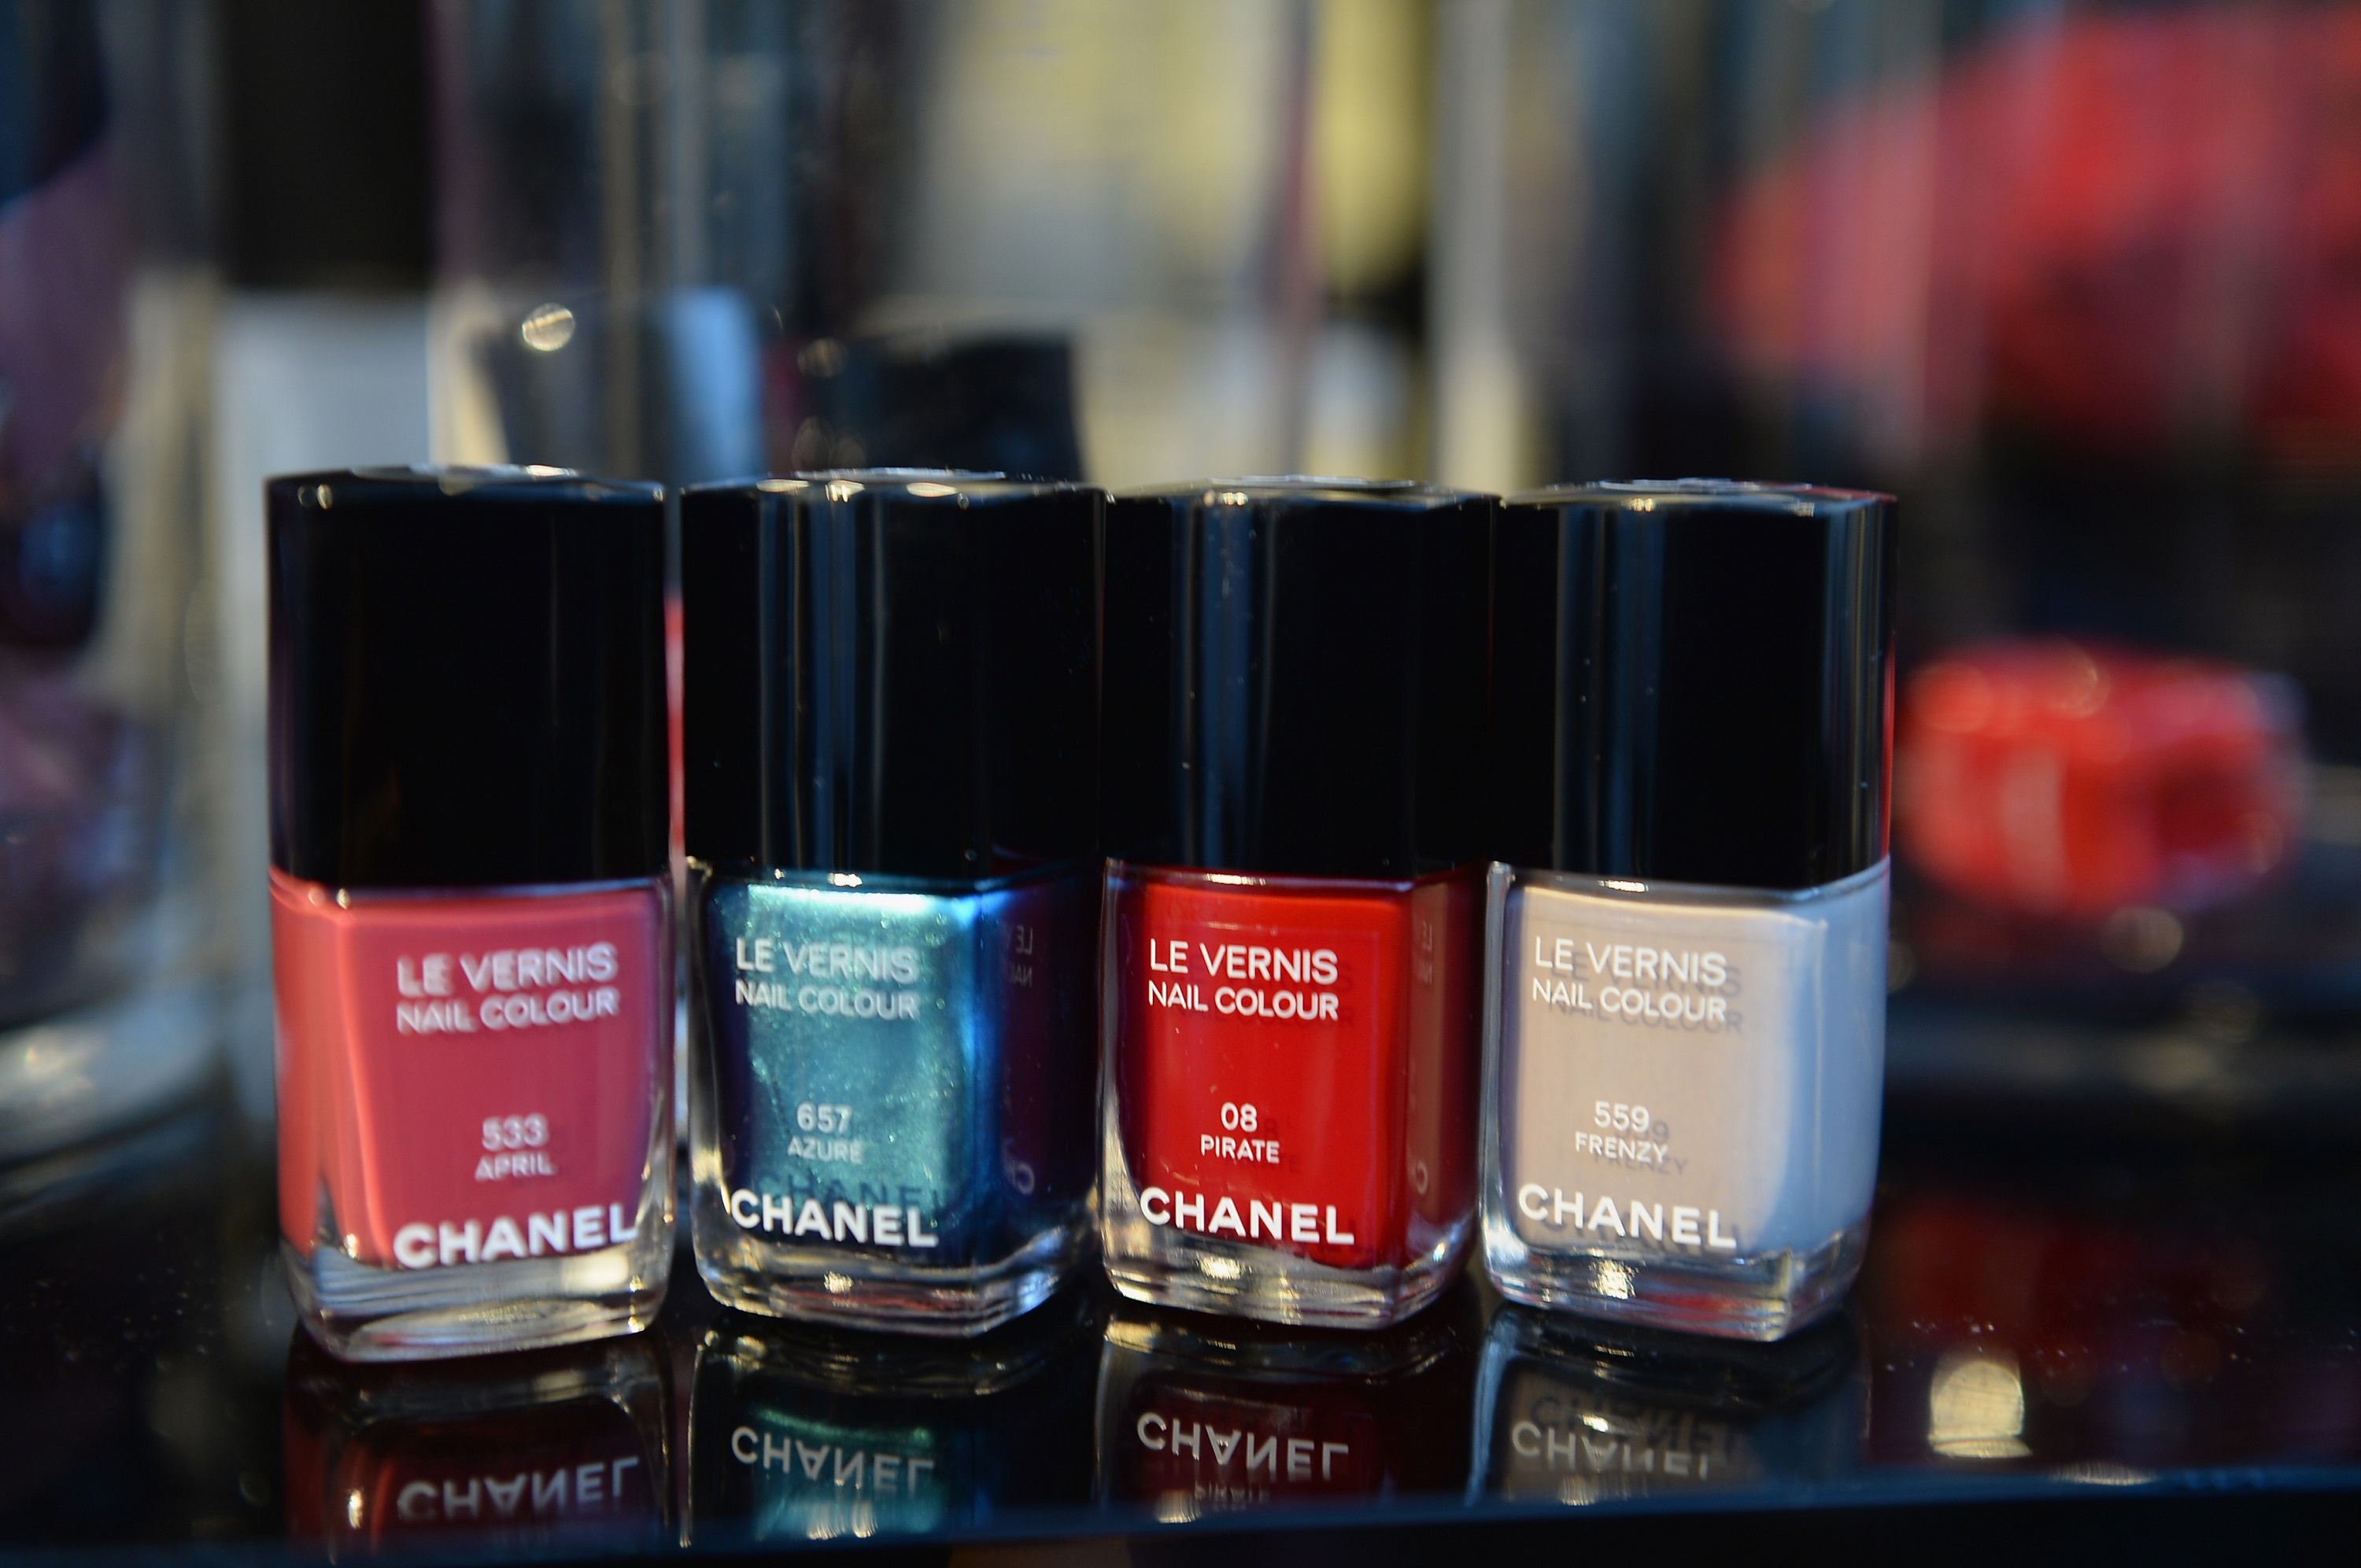 Mastering Luxury: 5 Key Insights from Chanel's Marketing Approach